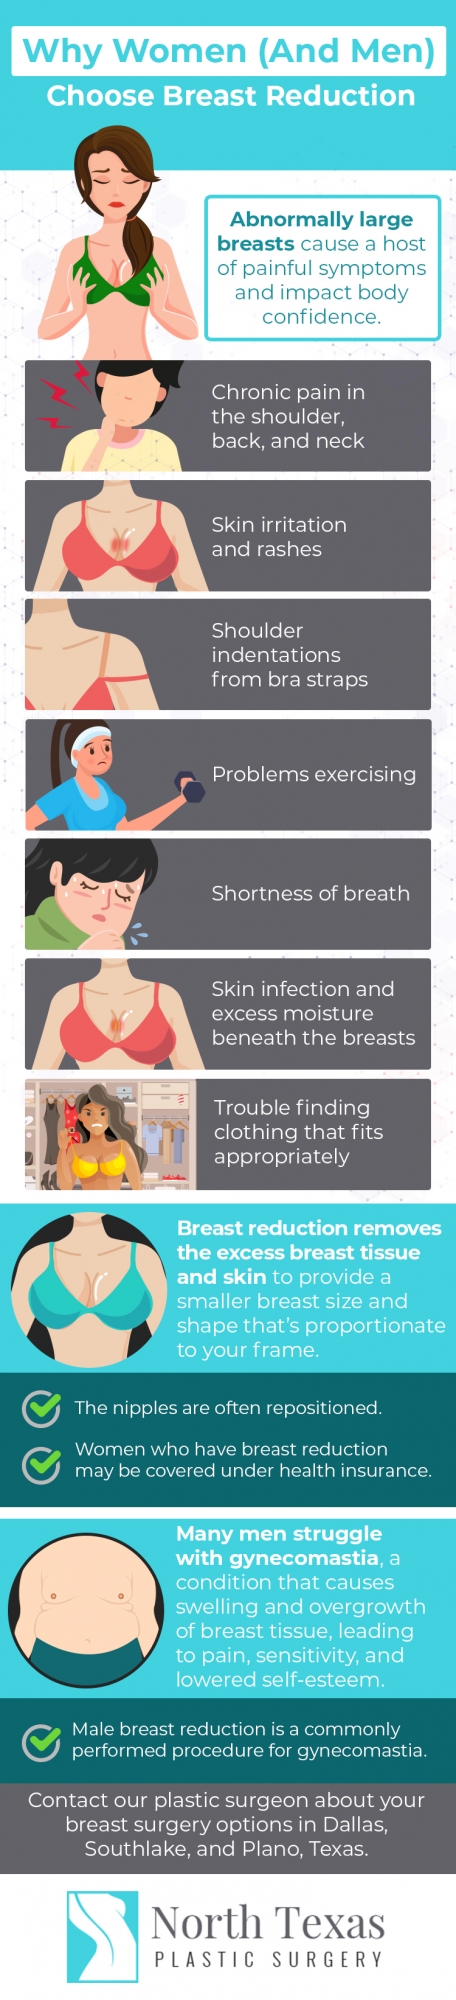 infographic discussing the reasons to choose breast reduction